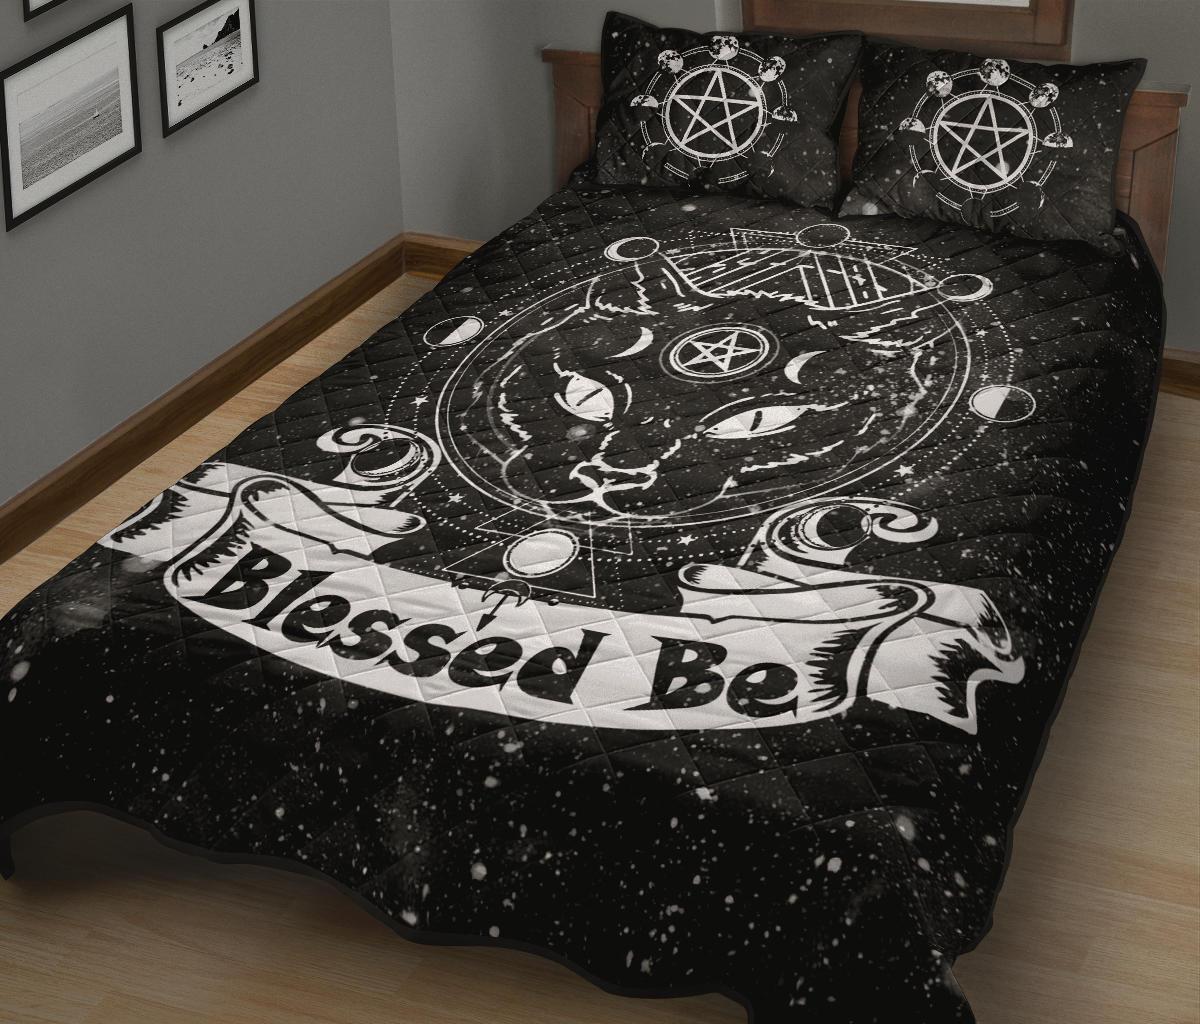 Wicca Cat Blessed Be - Witch Quilt Set 0822